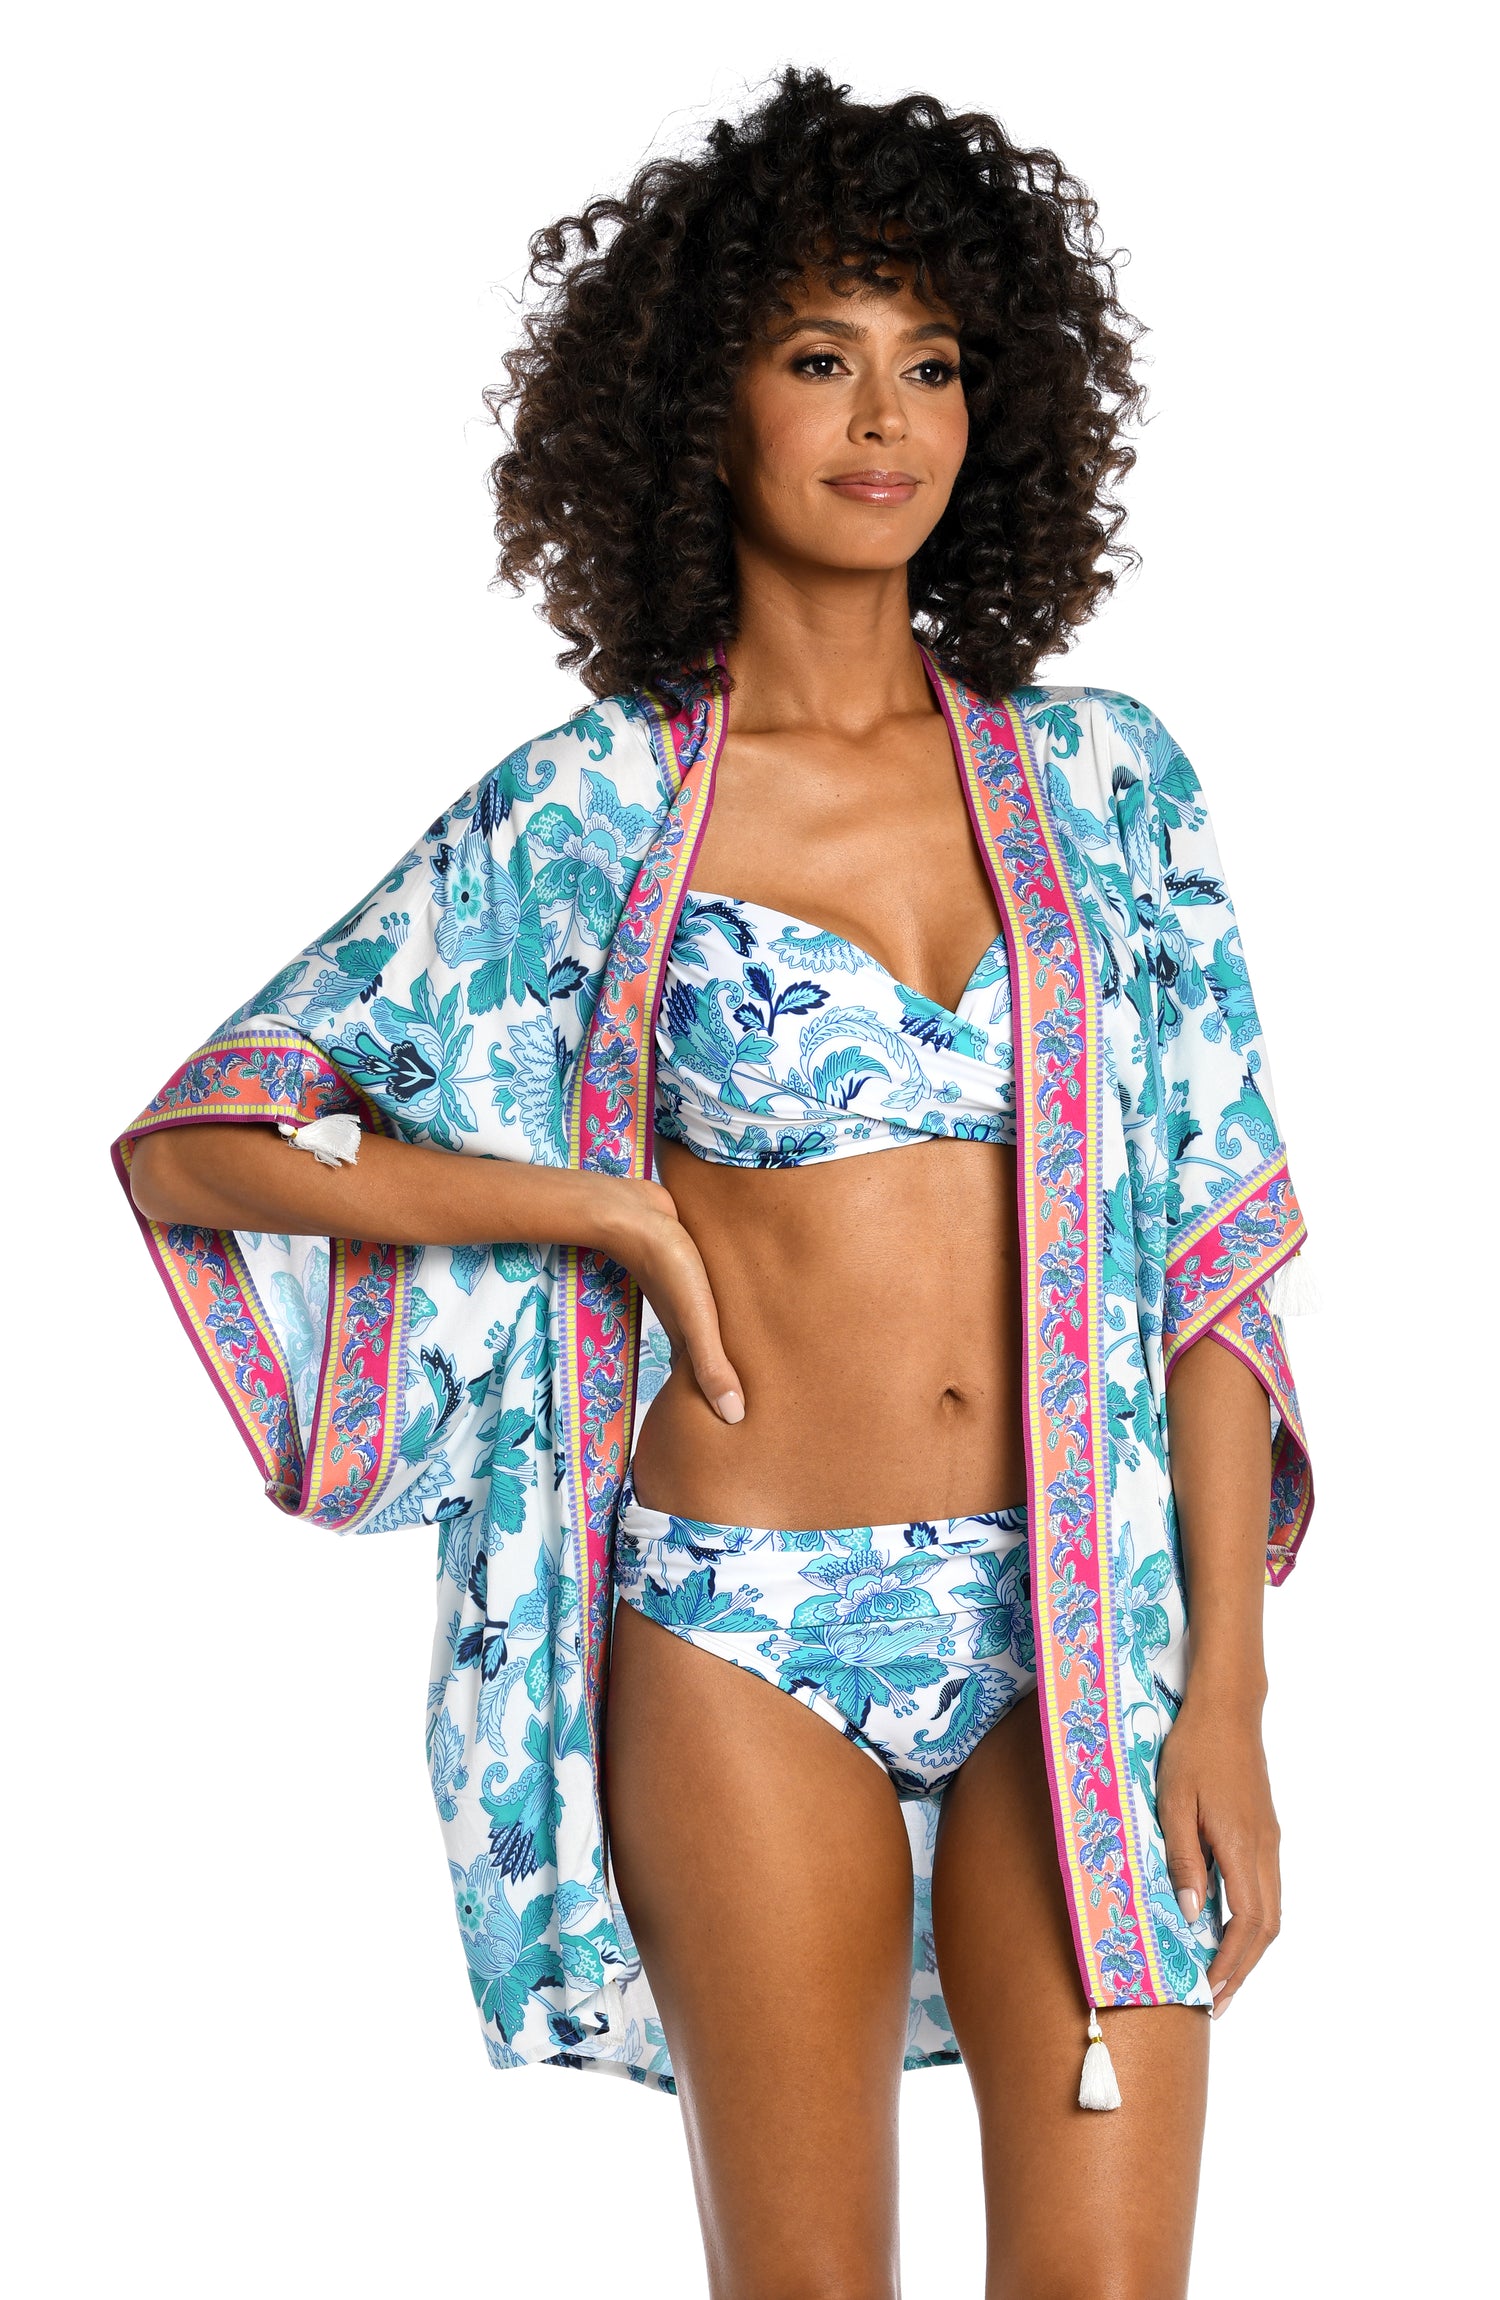 Model is wearing a light blue multi colored mediterranean printed kimono cover up from our Santorini Sun collection!